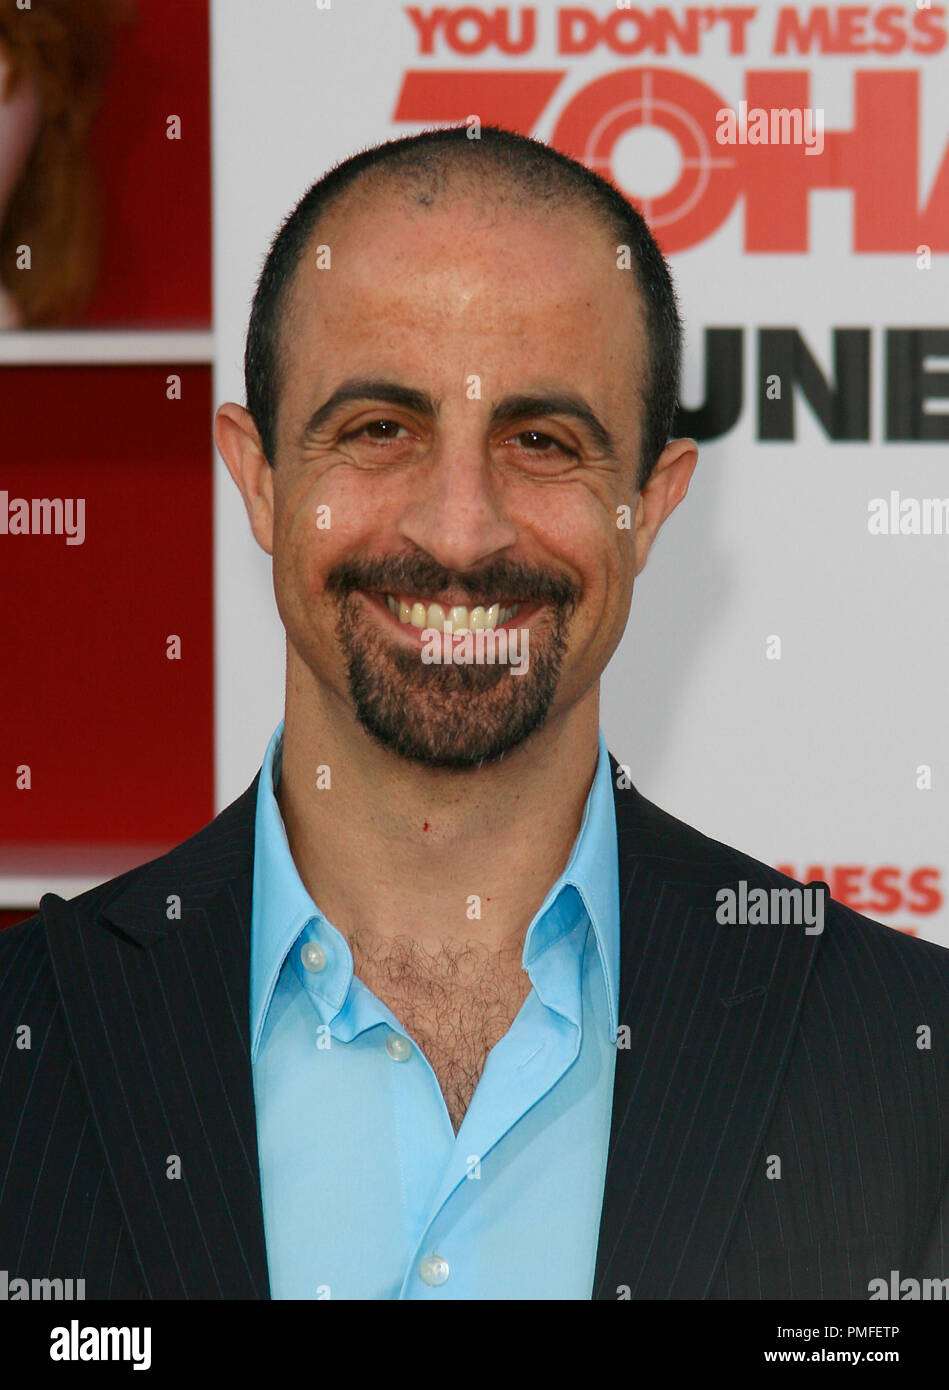 'You Don't Mess with the Zohan' Premiere Herzl Tobey 5-28-2008 / Grauman's Chinese Theater / Hollywood, CA / Columbia Pictures / Photo © Joseph Martinez / Picturelux  File Reference # 23525 0048JM   For Editorial Use Only -  All Rights Reserved Stock Photo